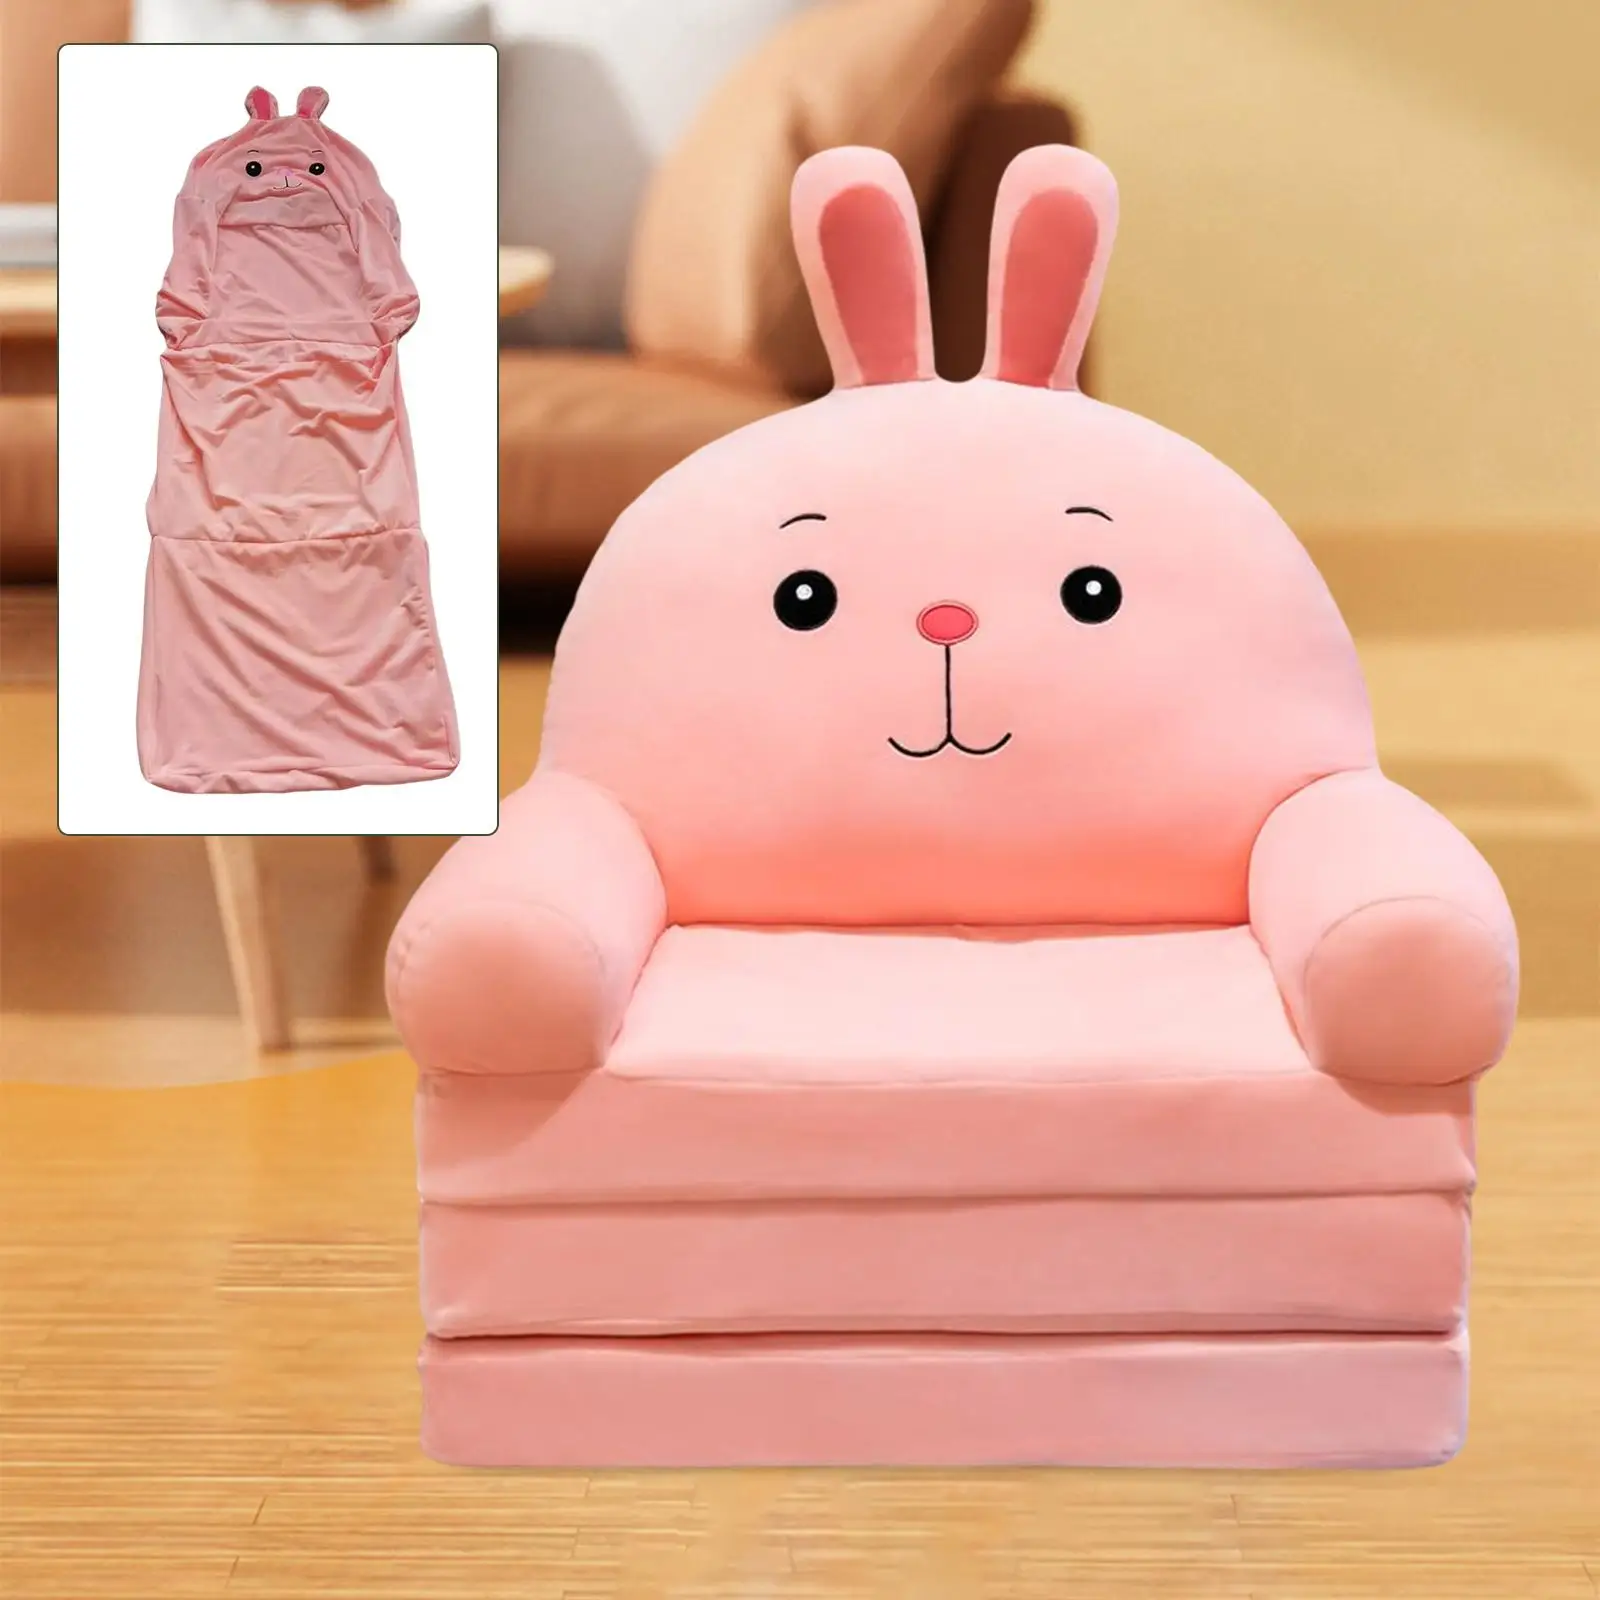 Toddlers Foldable Sofa Chair Cover Sofa Armchair Slipcover for Home Bedroom Decor